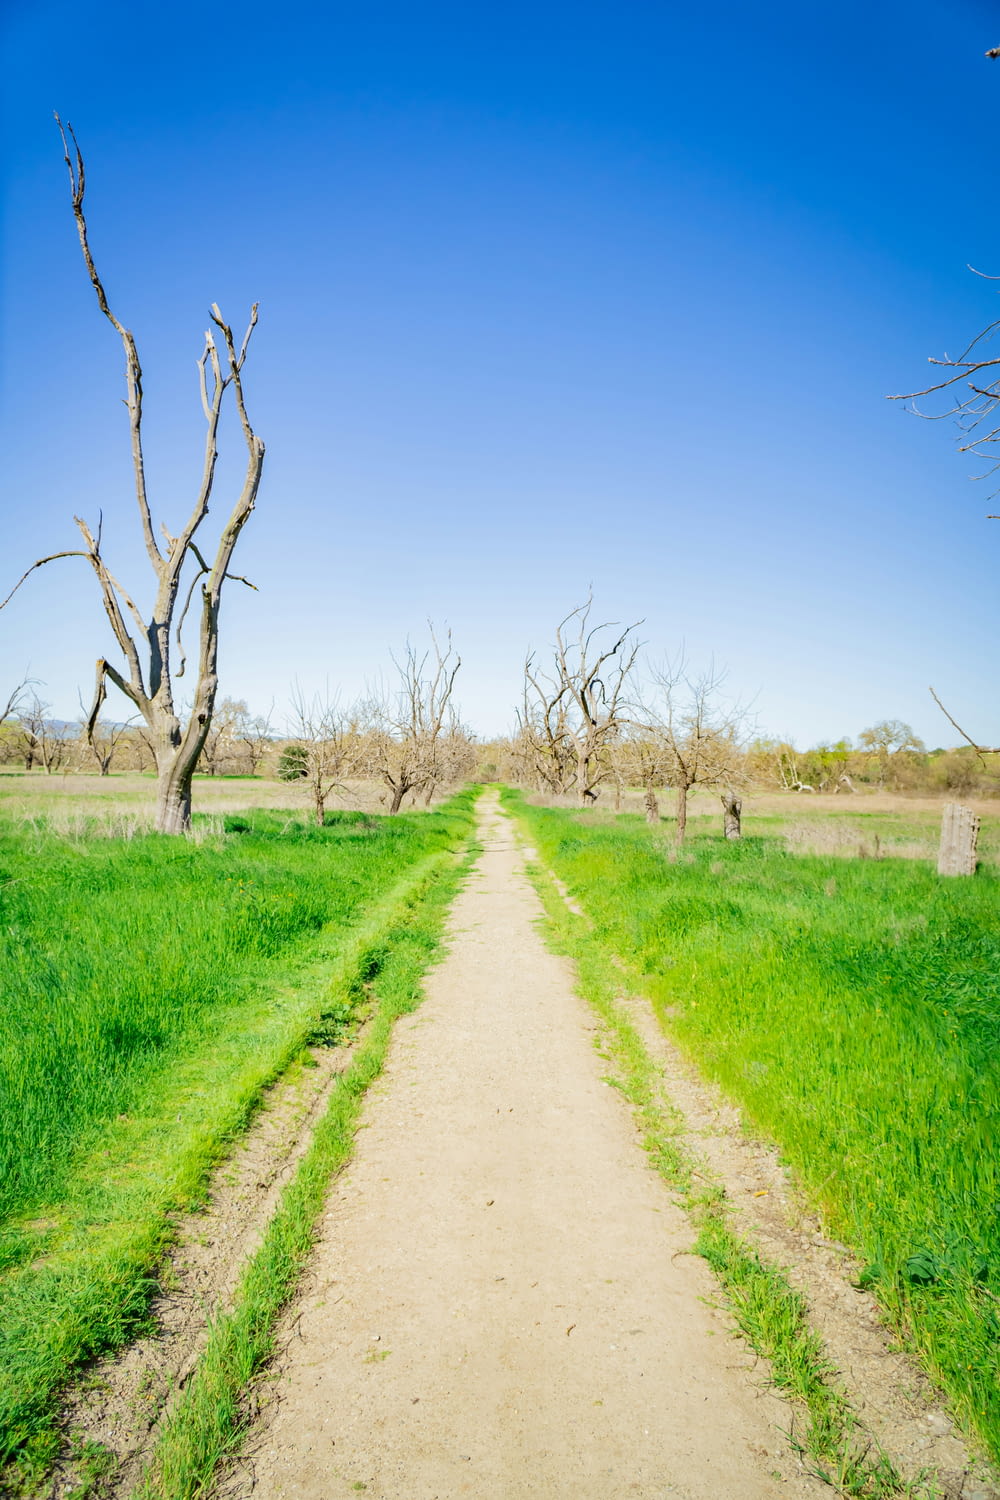 a dirt path in a grassy field with dead trees